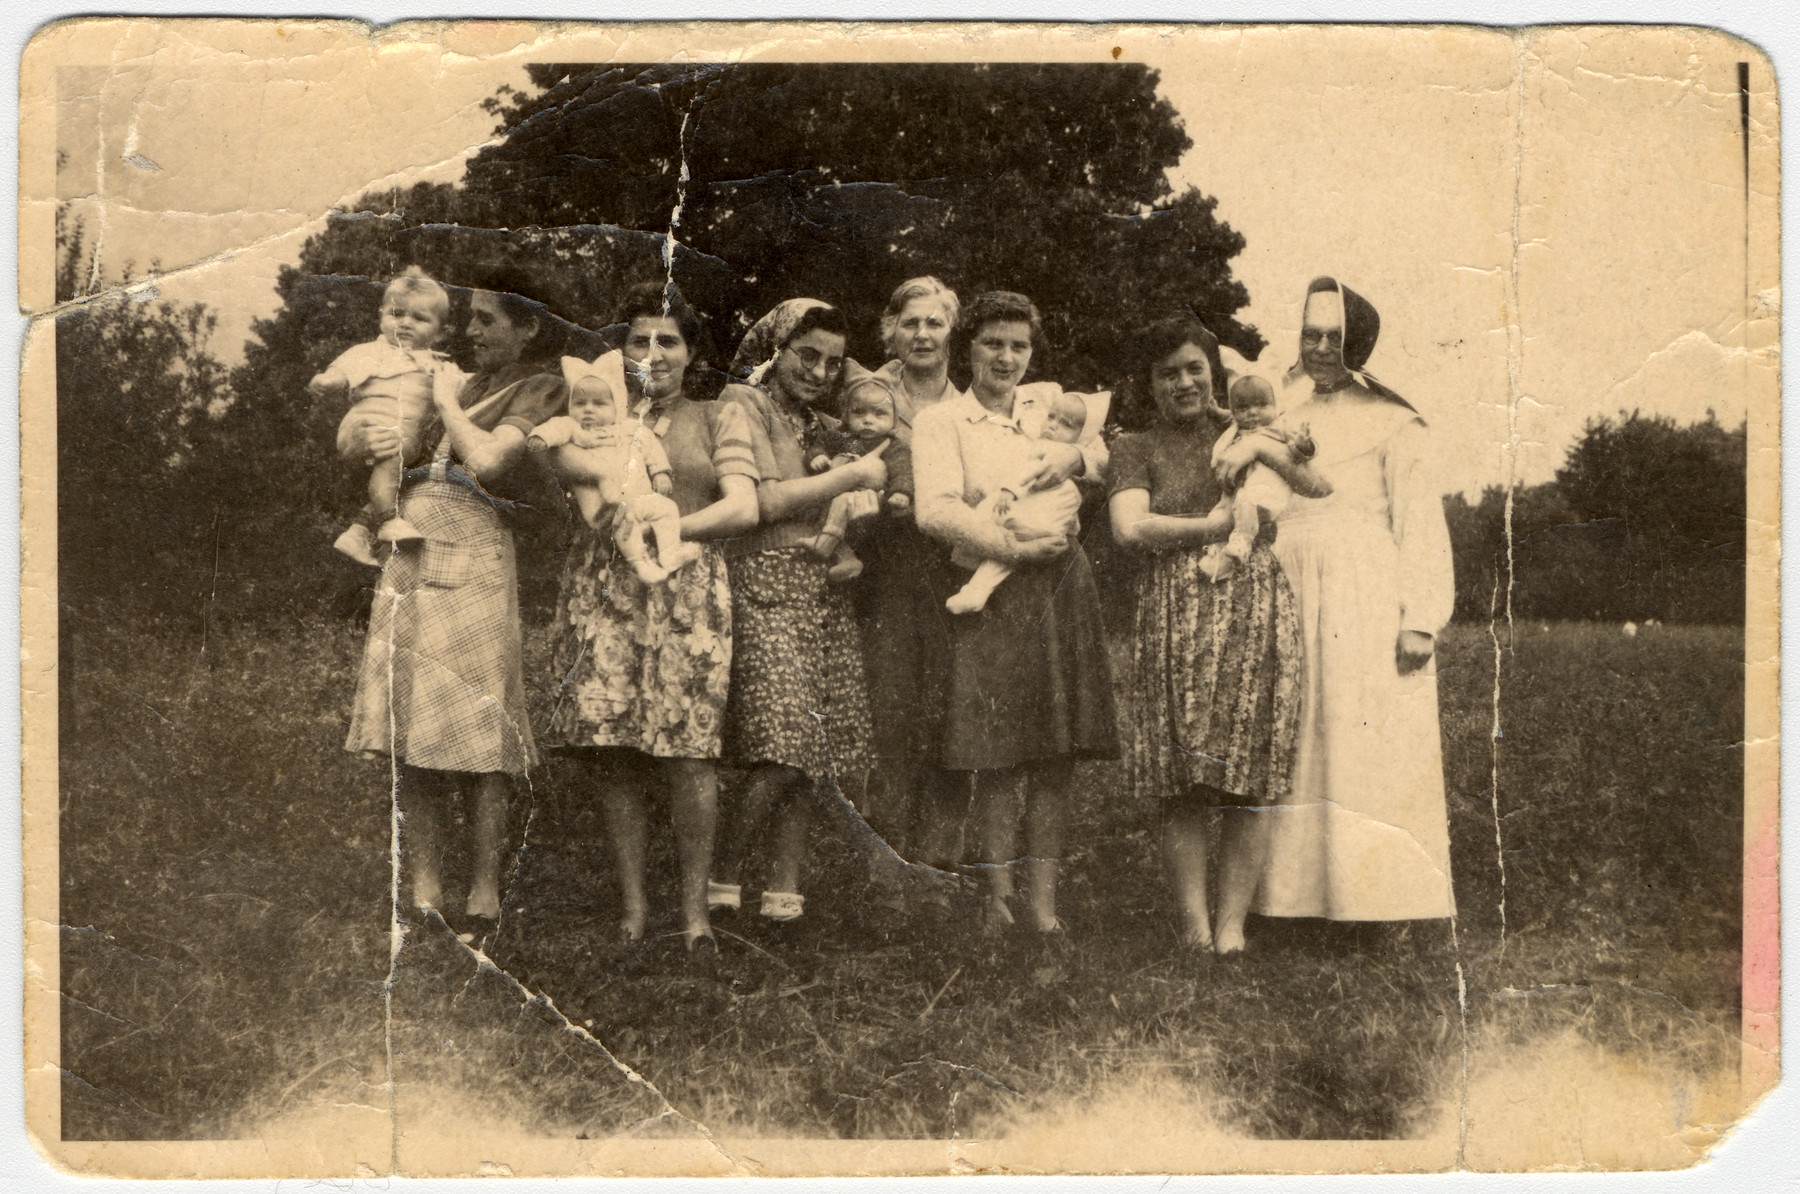 Group portrait of five Hungarian Jewish mothers with their infants at the Saint Ottilien sanitorium in Germany.   All were part of the Schwanger Kommando in the Kaufering concentration camp. 

Pictured from left to right are:  Elizabeth (Boezsi) Legmann with her son Gyuri, Ibolya Kovacs with her daughter Agnes; Suri Hirsch with her son Yossi;  Magda Fenyvesi's mother, Magda Fenyvesi with her daughter Judit; and Dora Loewy with her daughter Zsuzsi.  

Not pictured are: Eva Fleishmanova and her daughter Maria; and Miriam Schwarcz Rosenthal and her son Laci (Leslie).